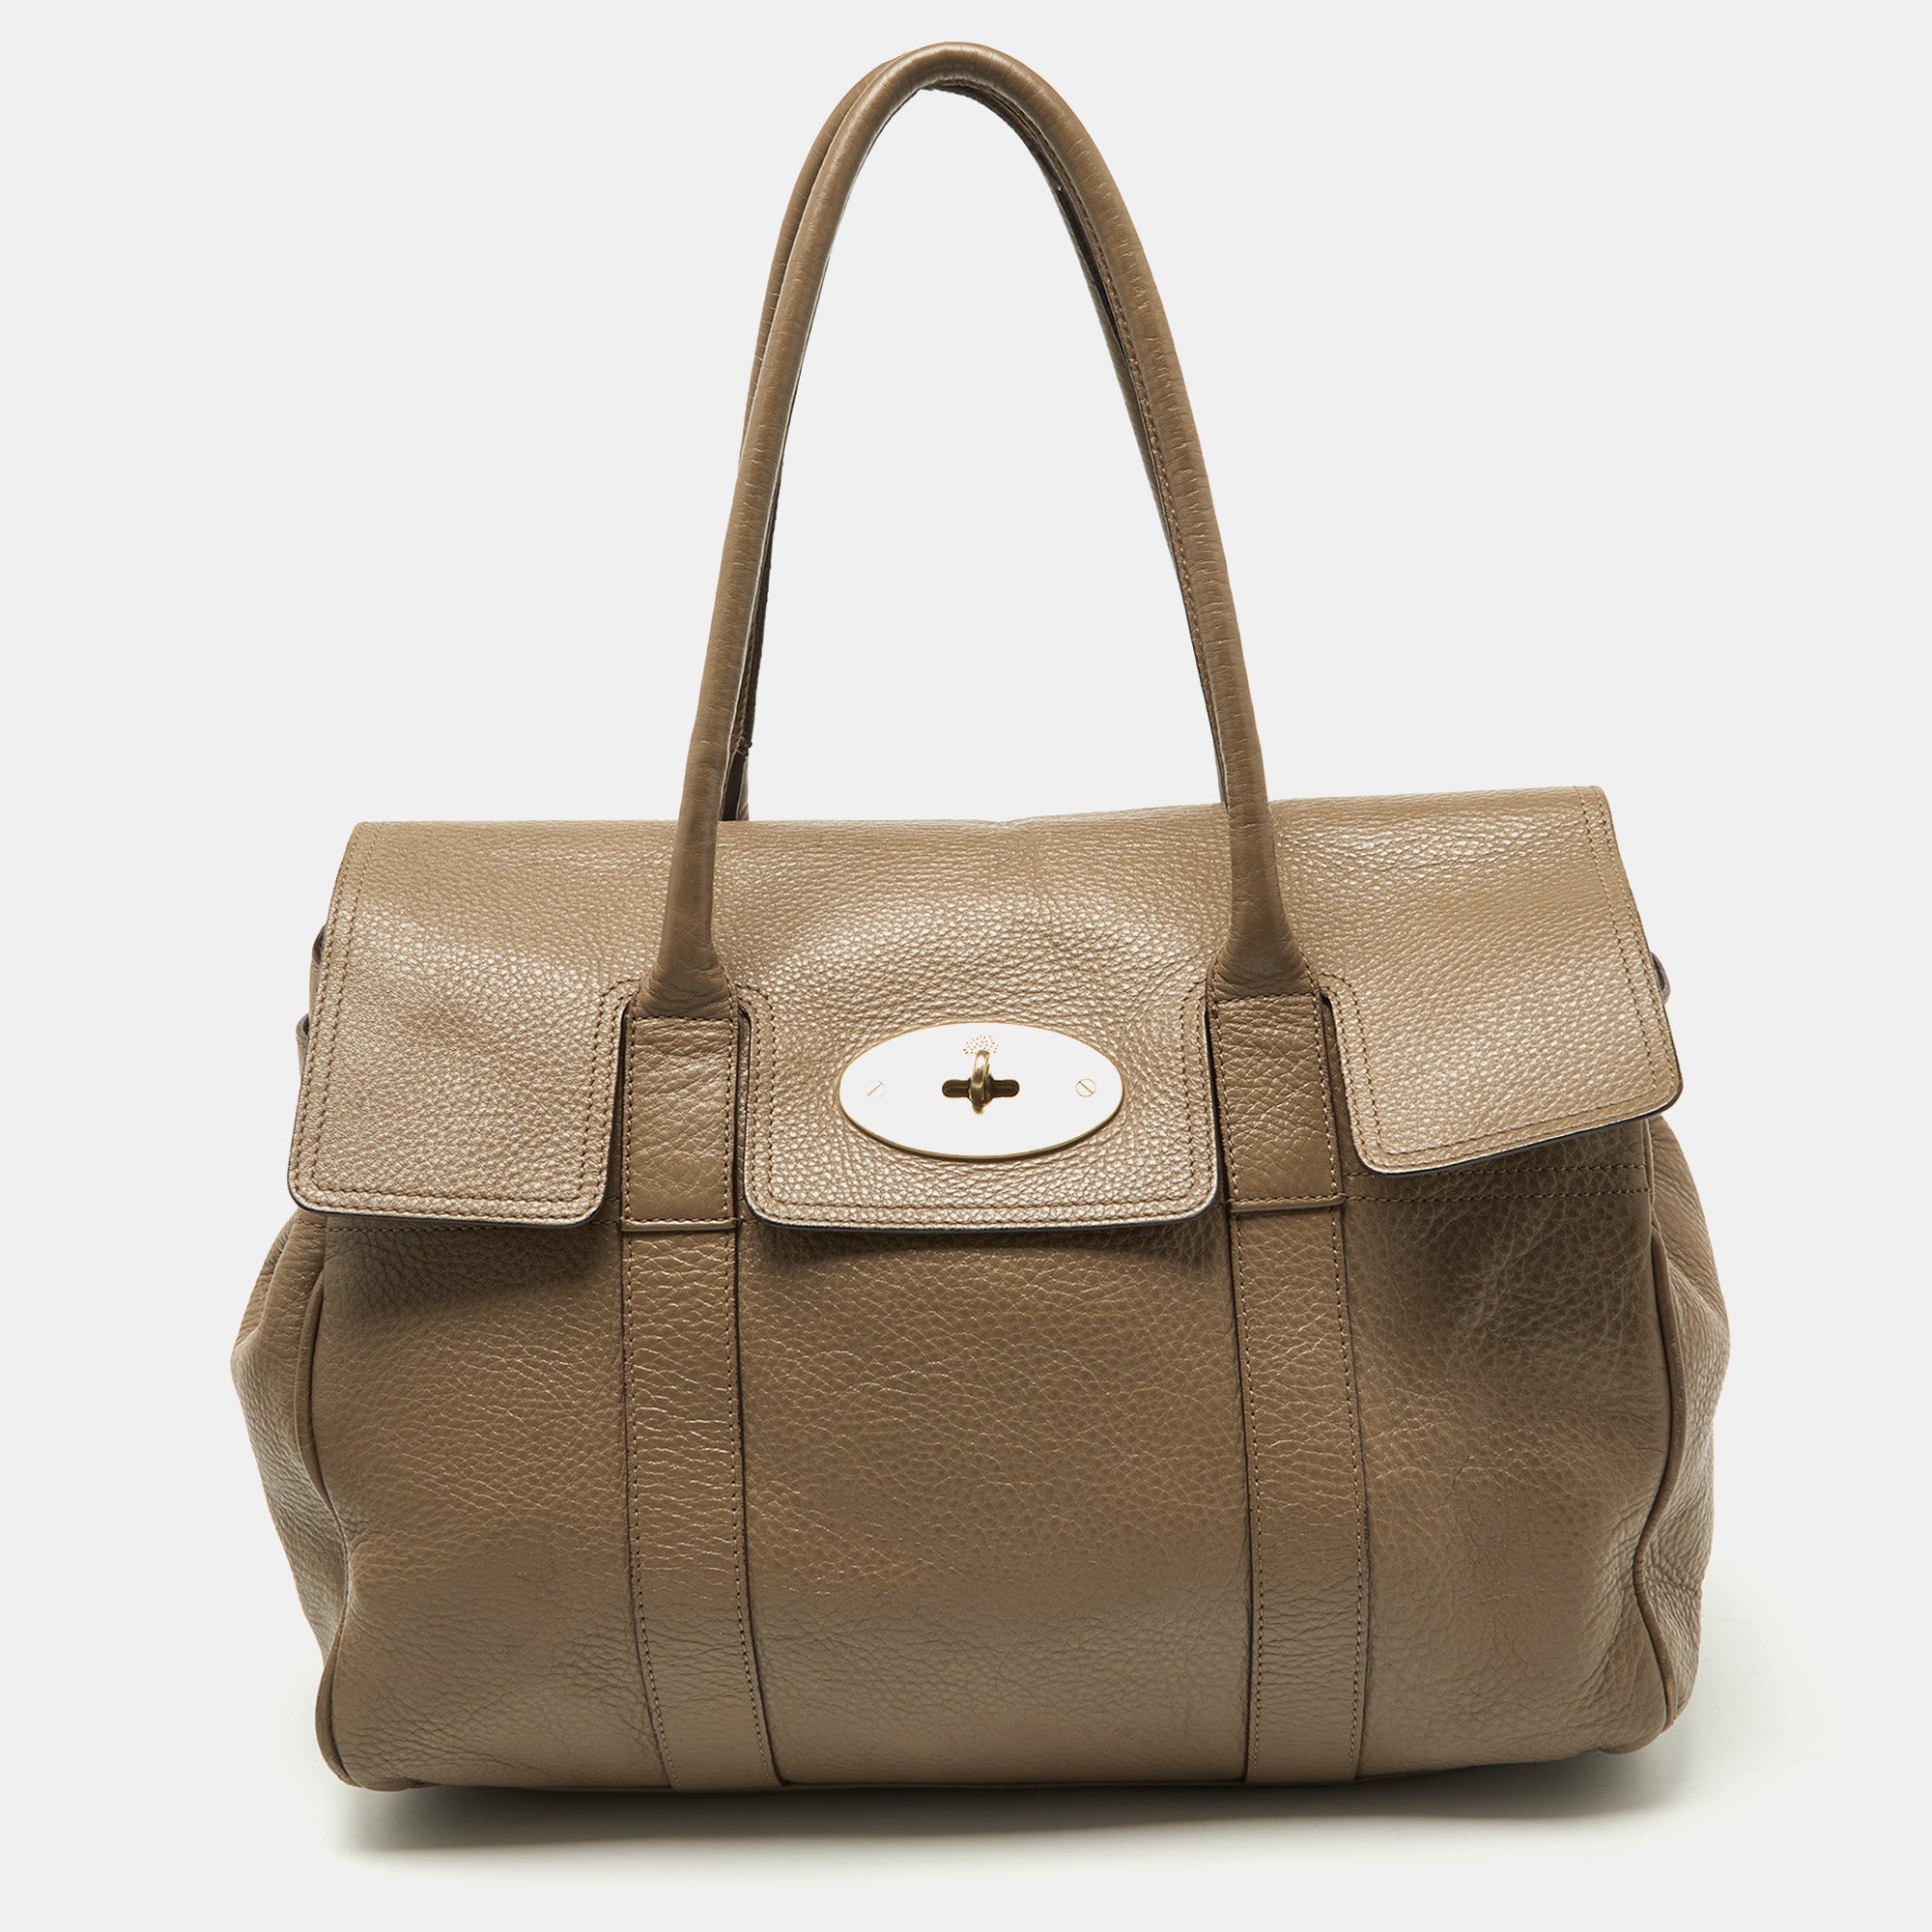 Mulberry Bayswater Tote in Brown, Leather | Handbag Clinic